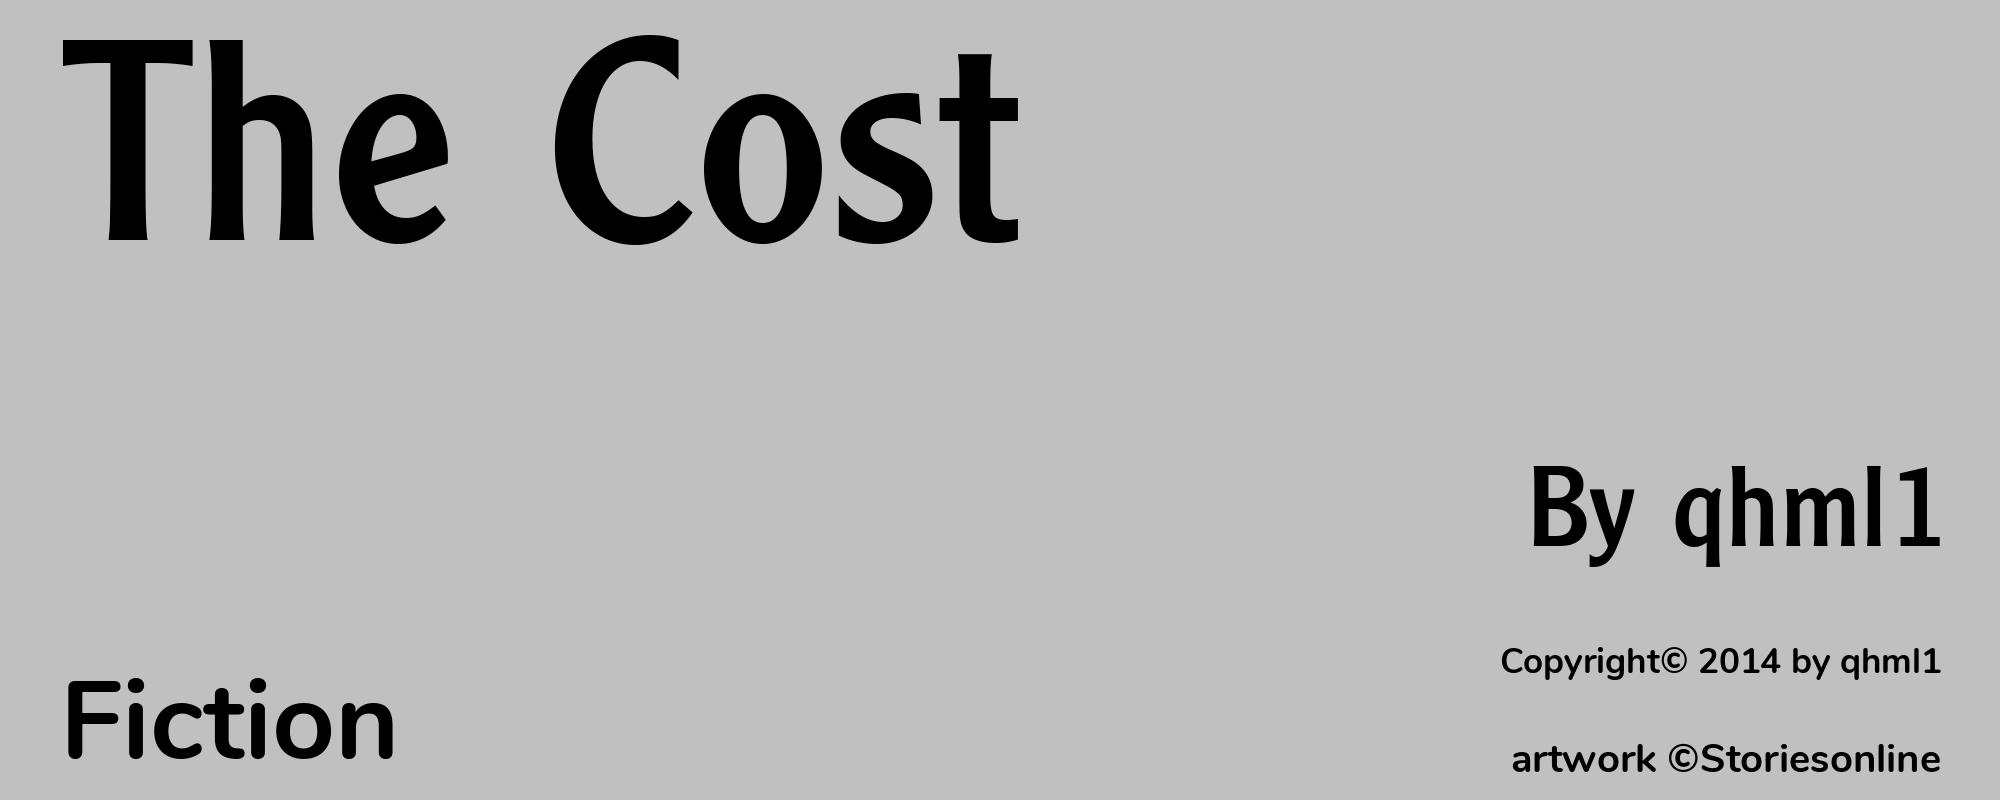 The Cost - Cover